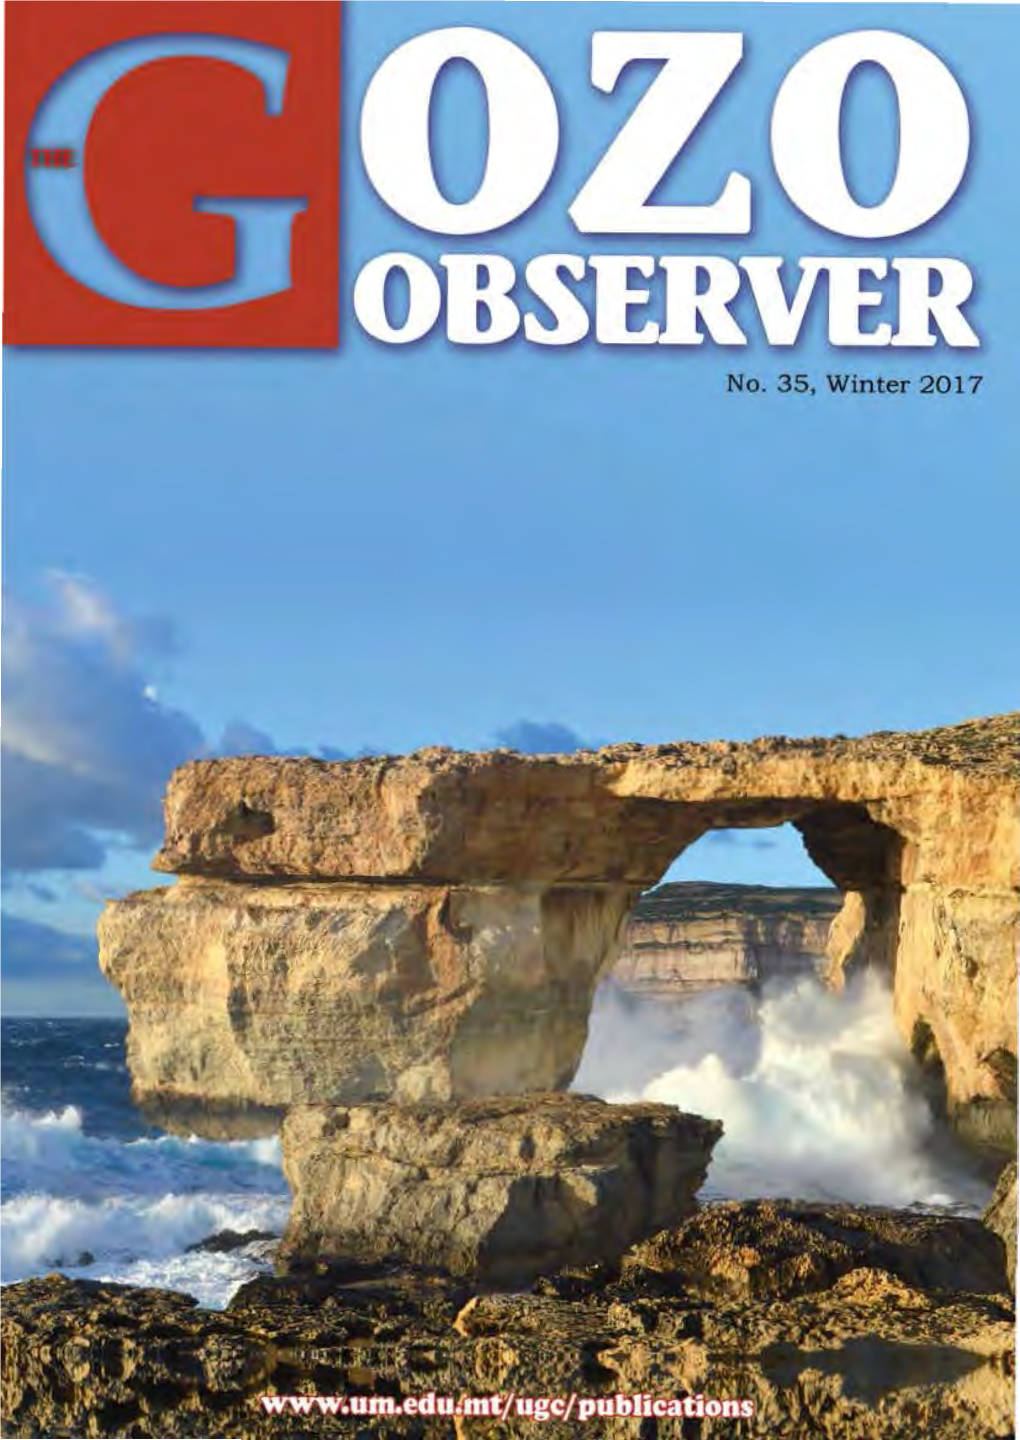 The Gozo Observer : Issue 35 : Winter 2017